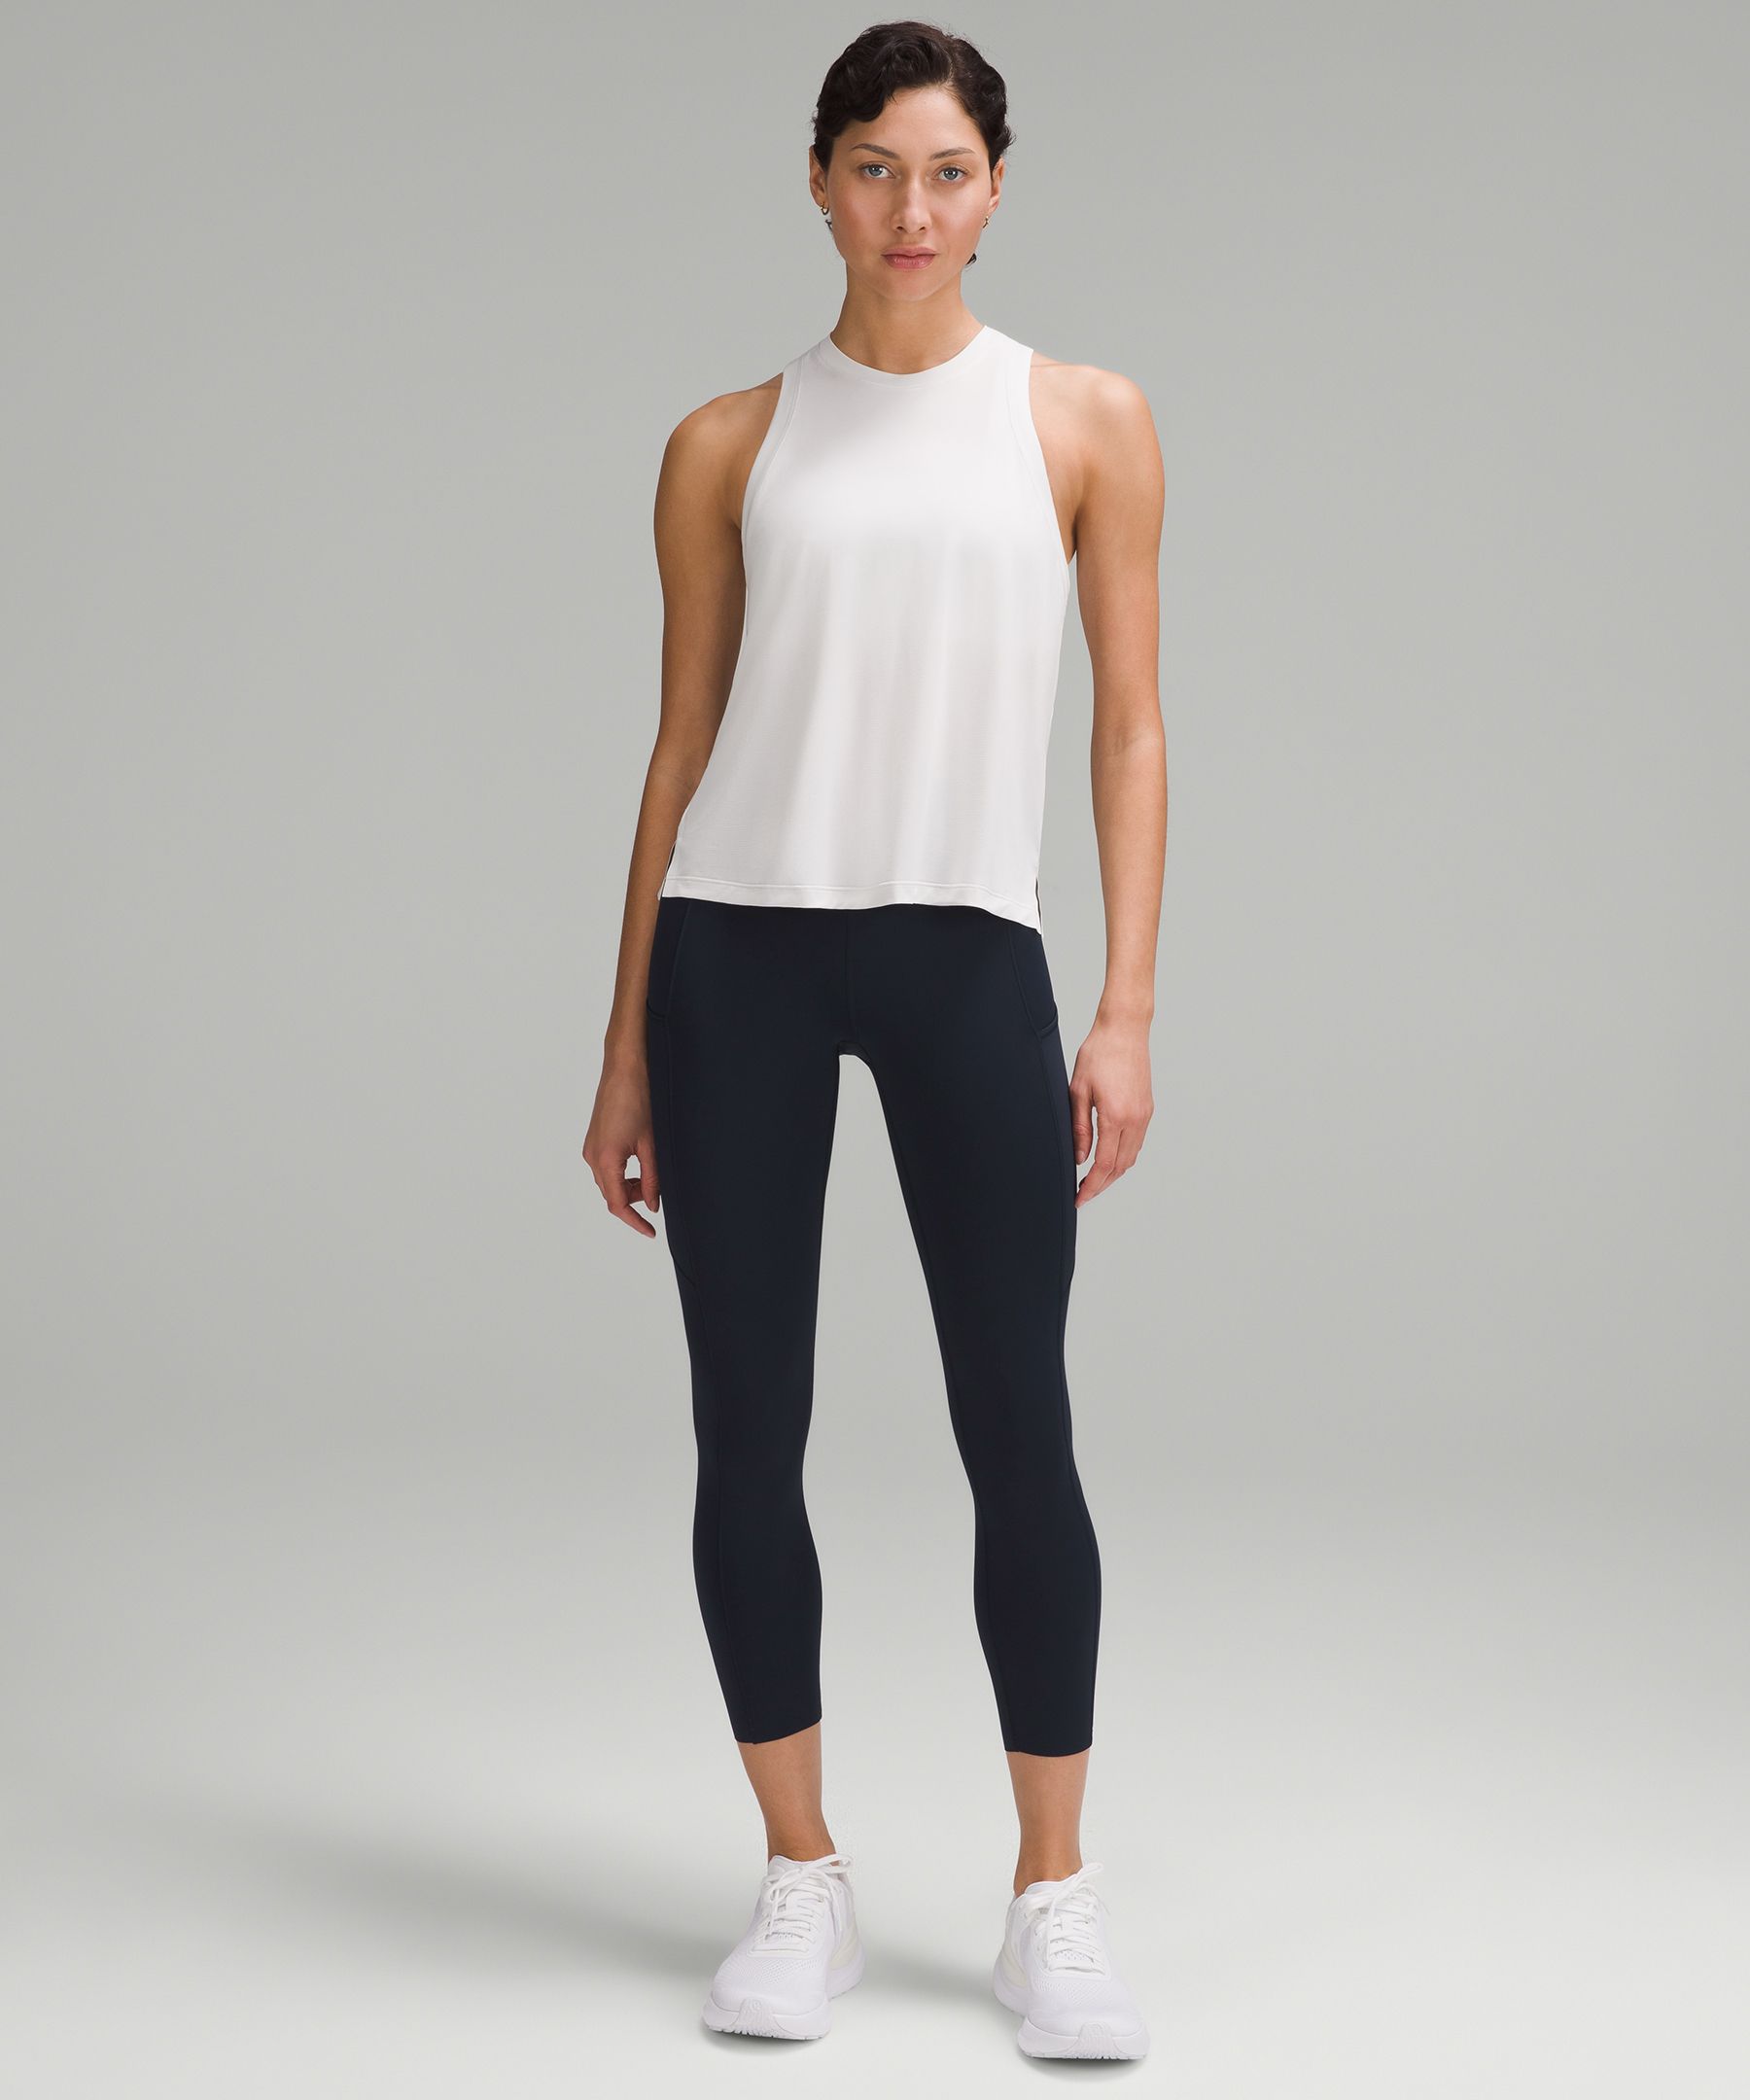 Lululemon Fast and Free High Rise Crop 23 - Speckle Trail Black